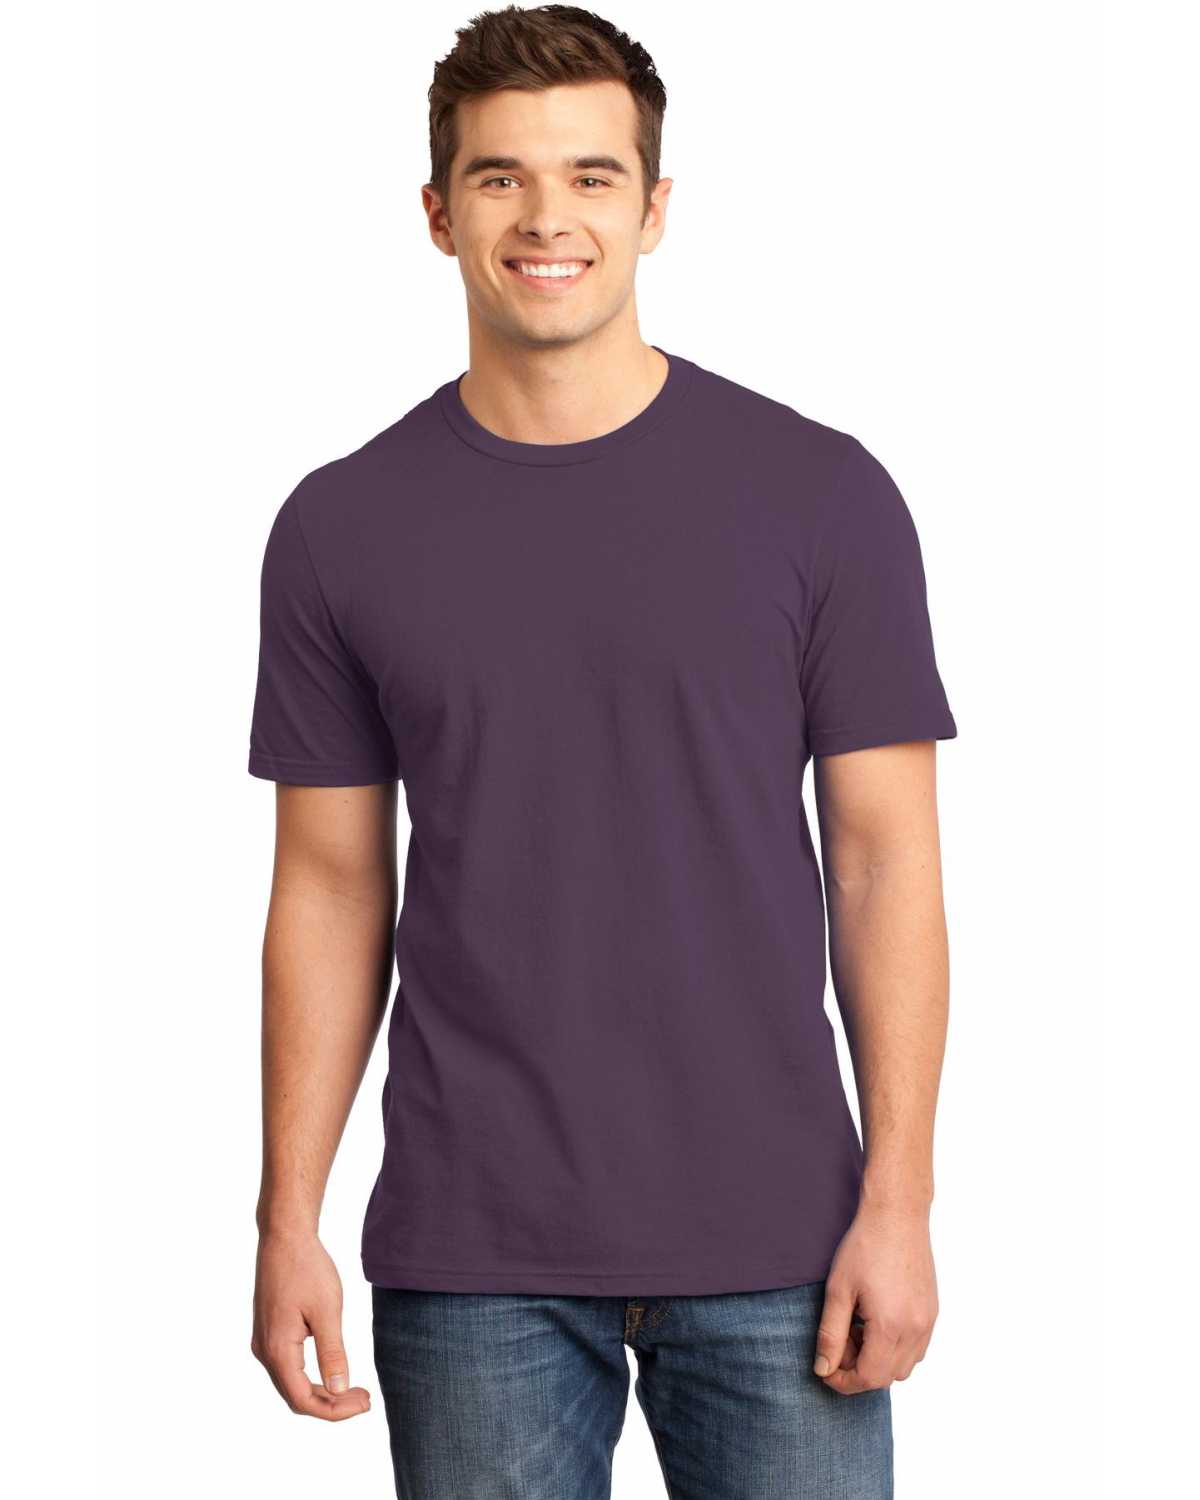 District DT6000 Young Mens Very Important Tee on discount ...